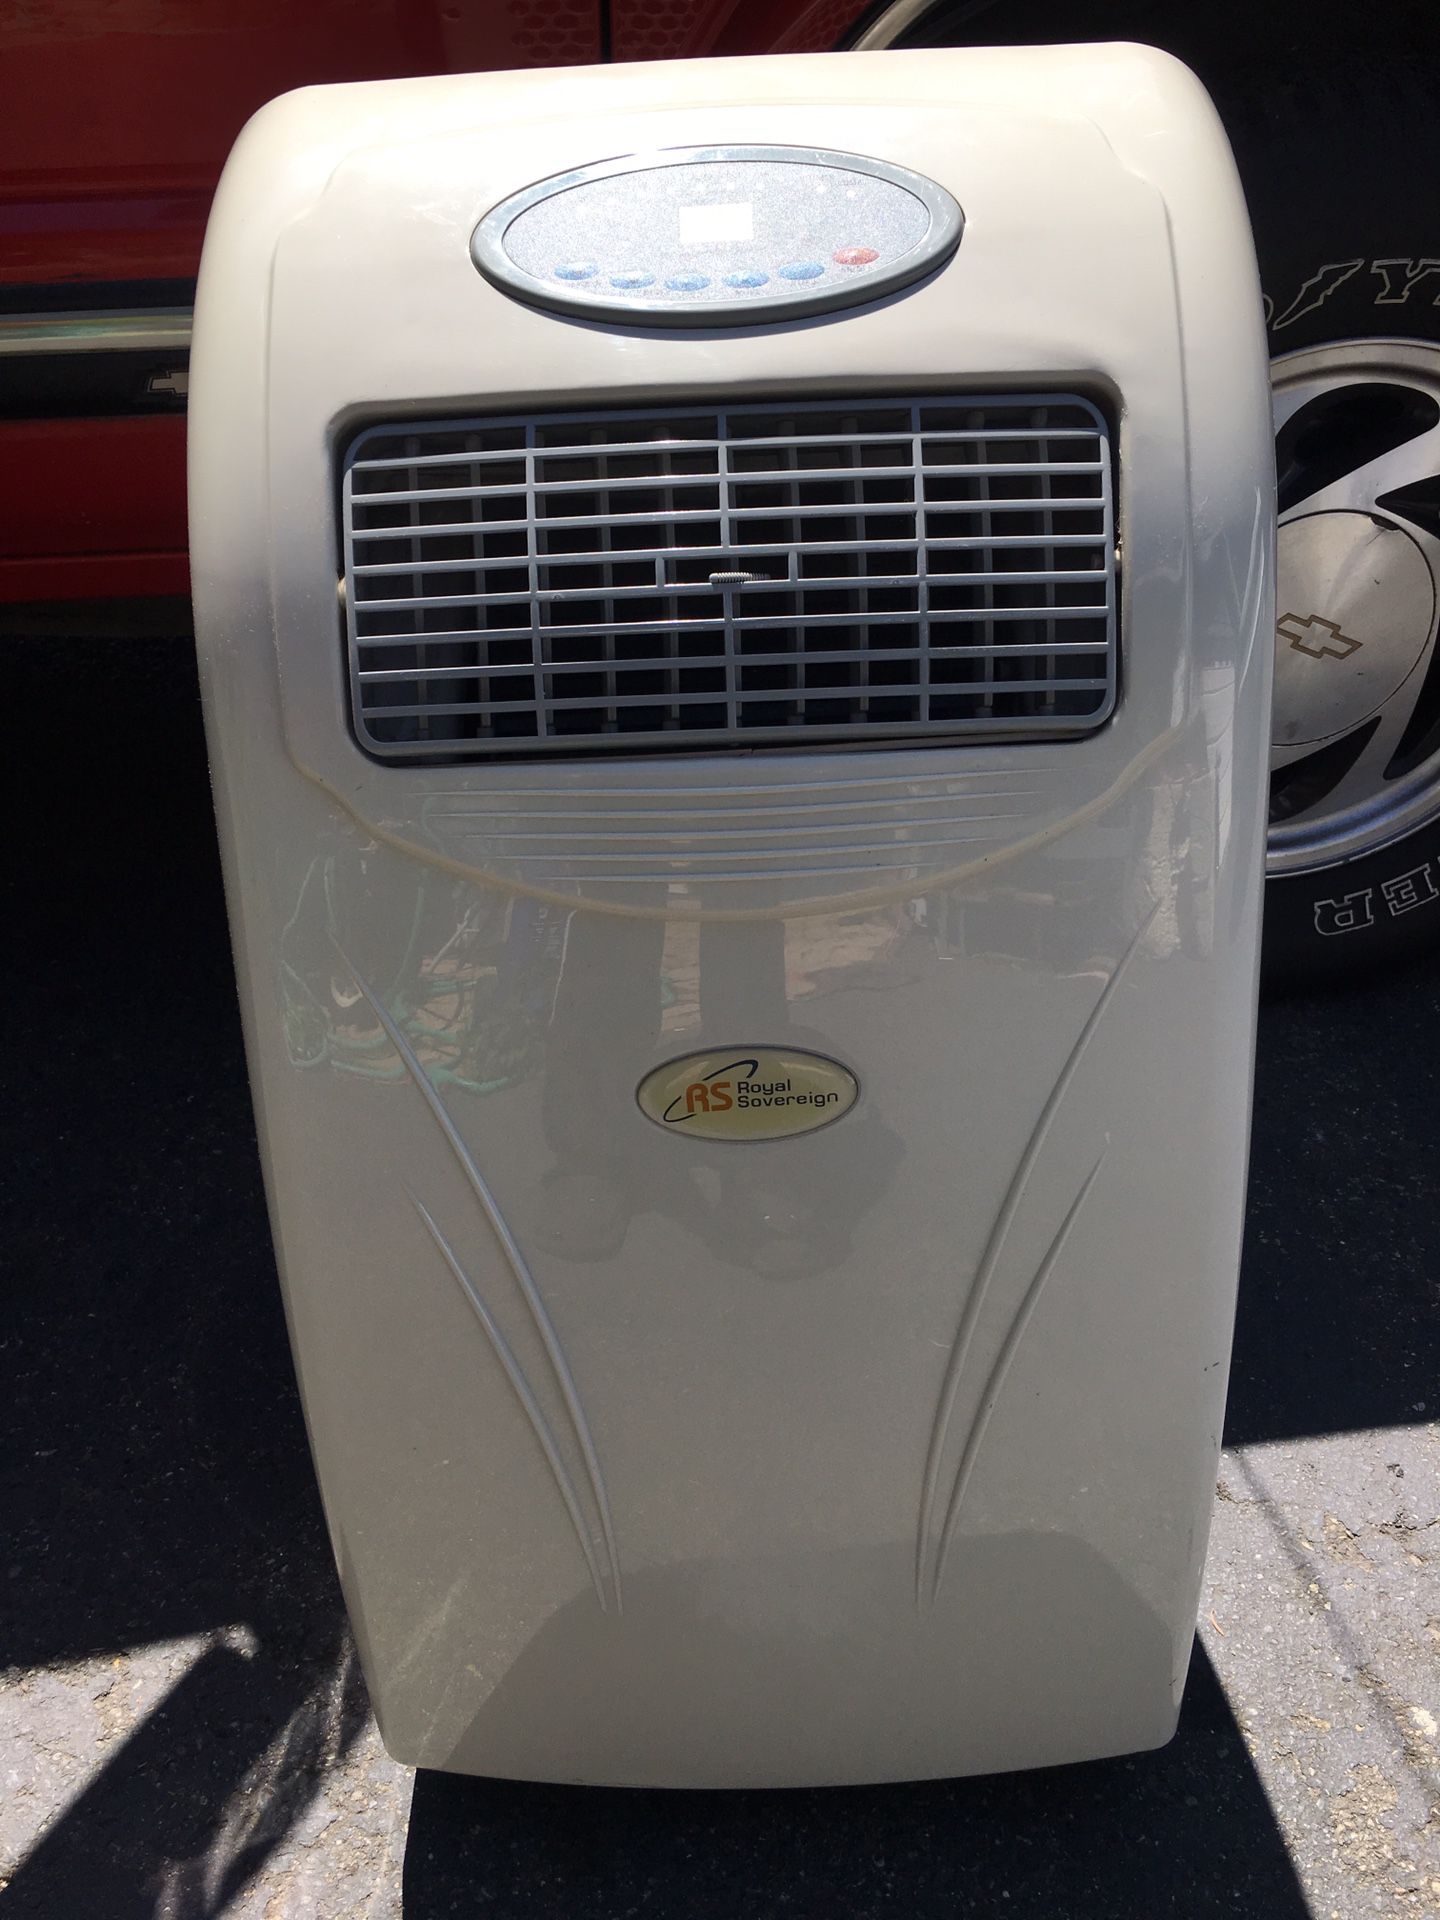 Royal sovereign portable air conditioner 9,000 B.T.U. Works good. (Price firm)